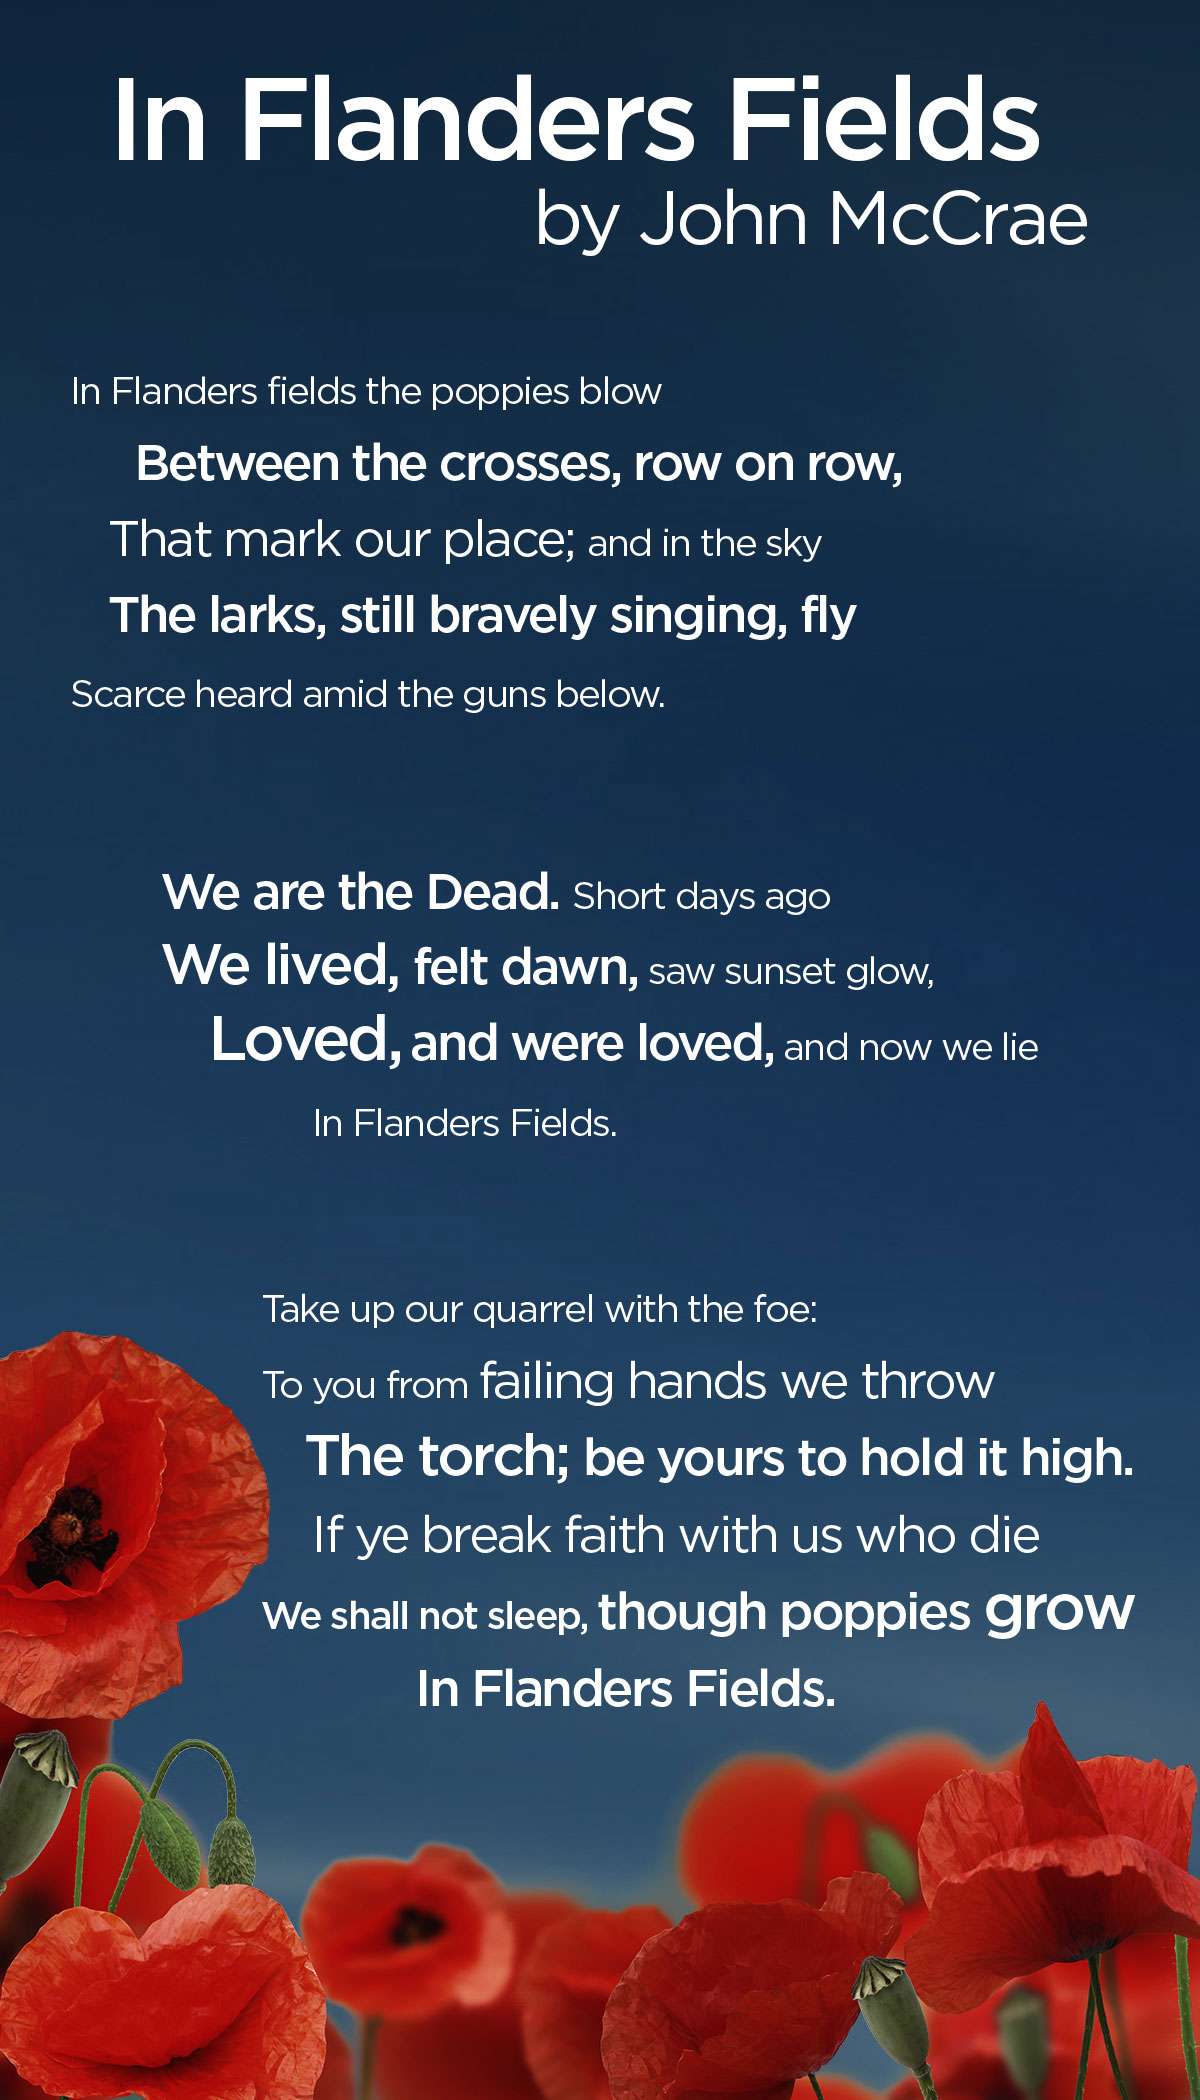 Most Canadians don't know the words to 'In Flanders Fields': Ipsos poll